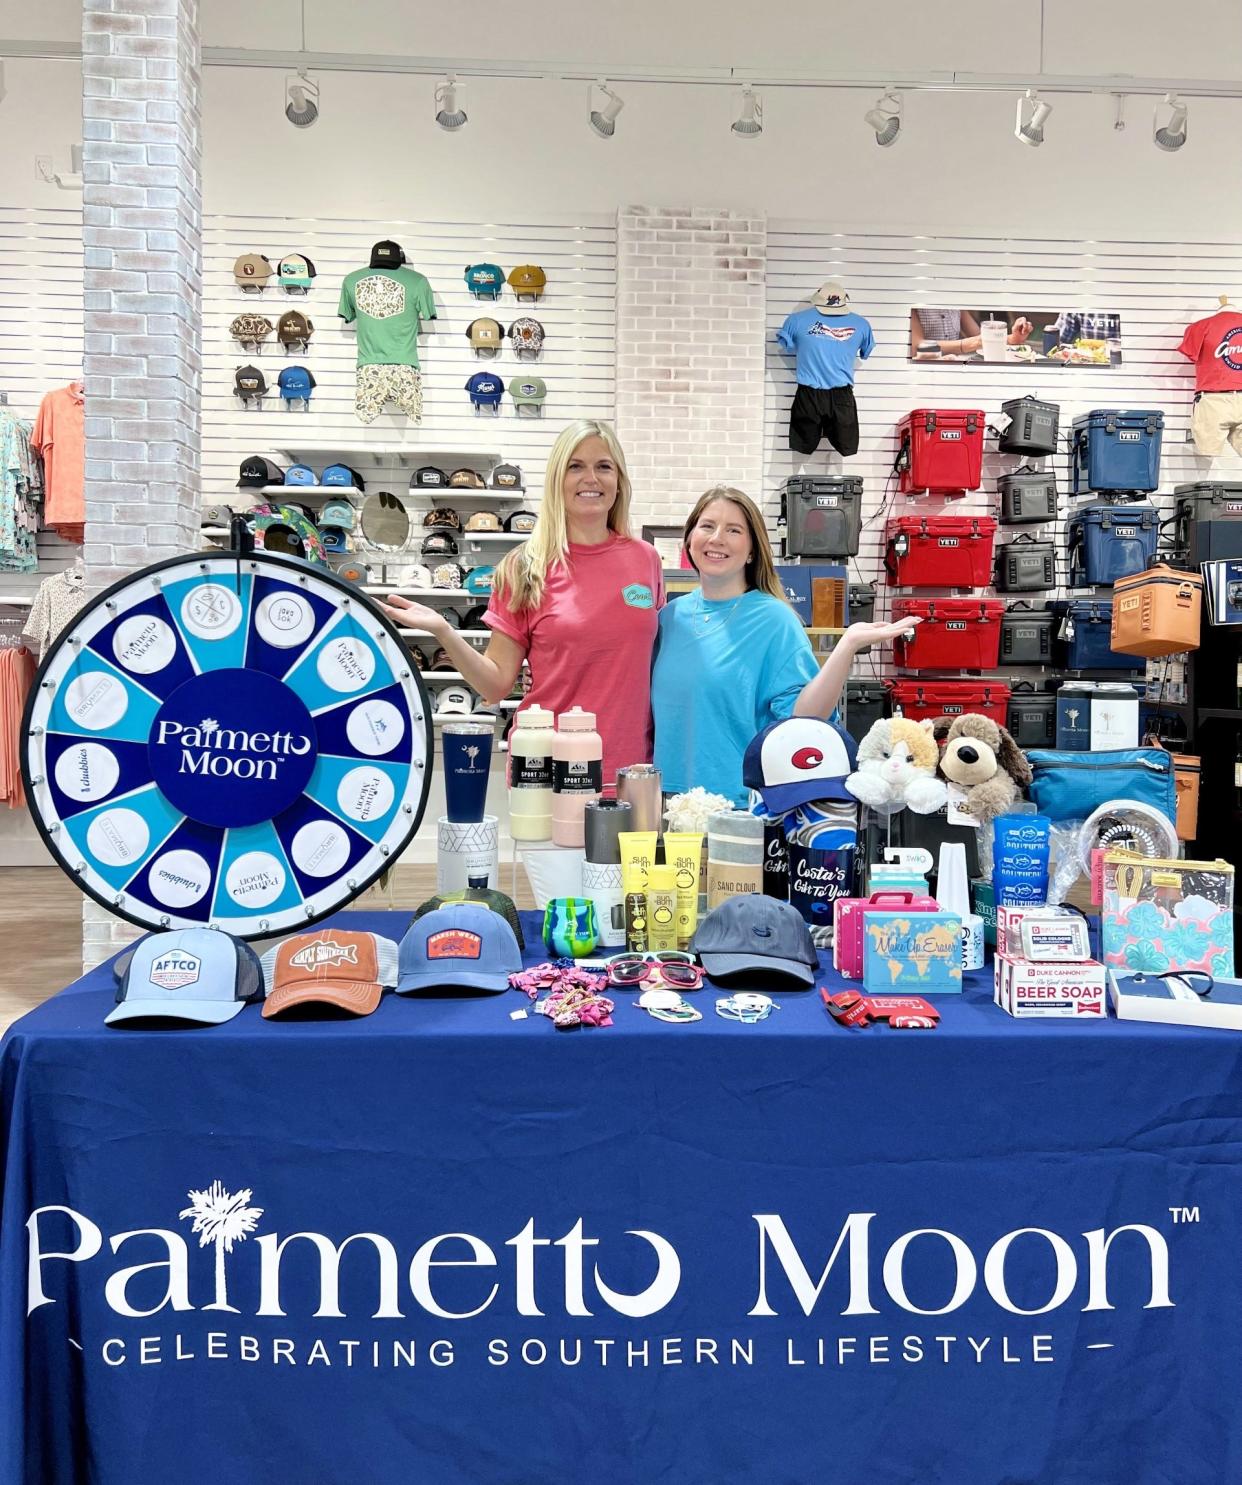 The new store will have a weekend-long celebration between March 8 and March 10. As part of it, Palmetto Moon give out two custom 10-ounce YETI Tumblers, while they are available, to people who spend $50.